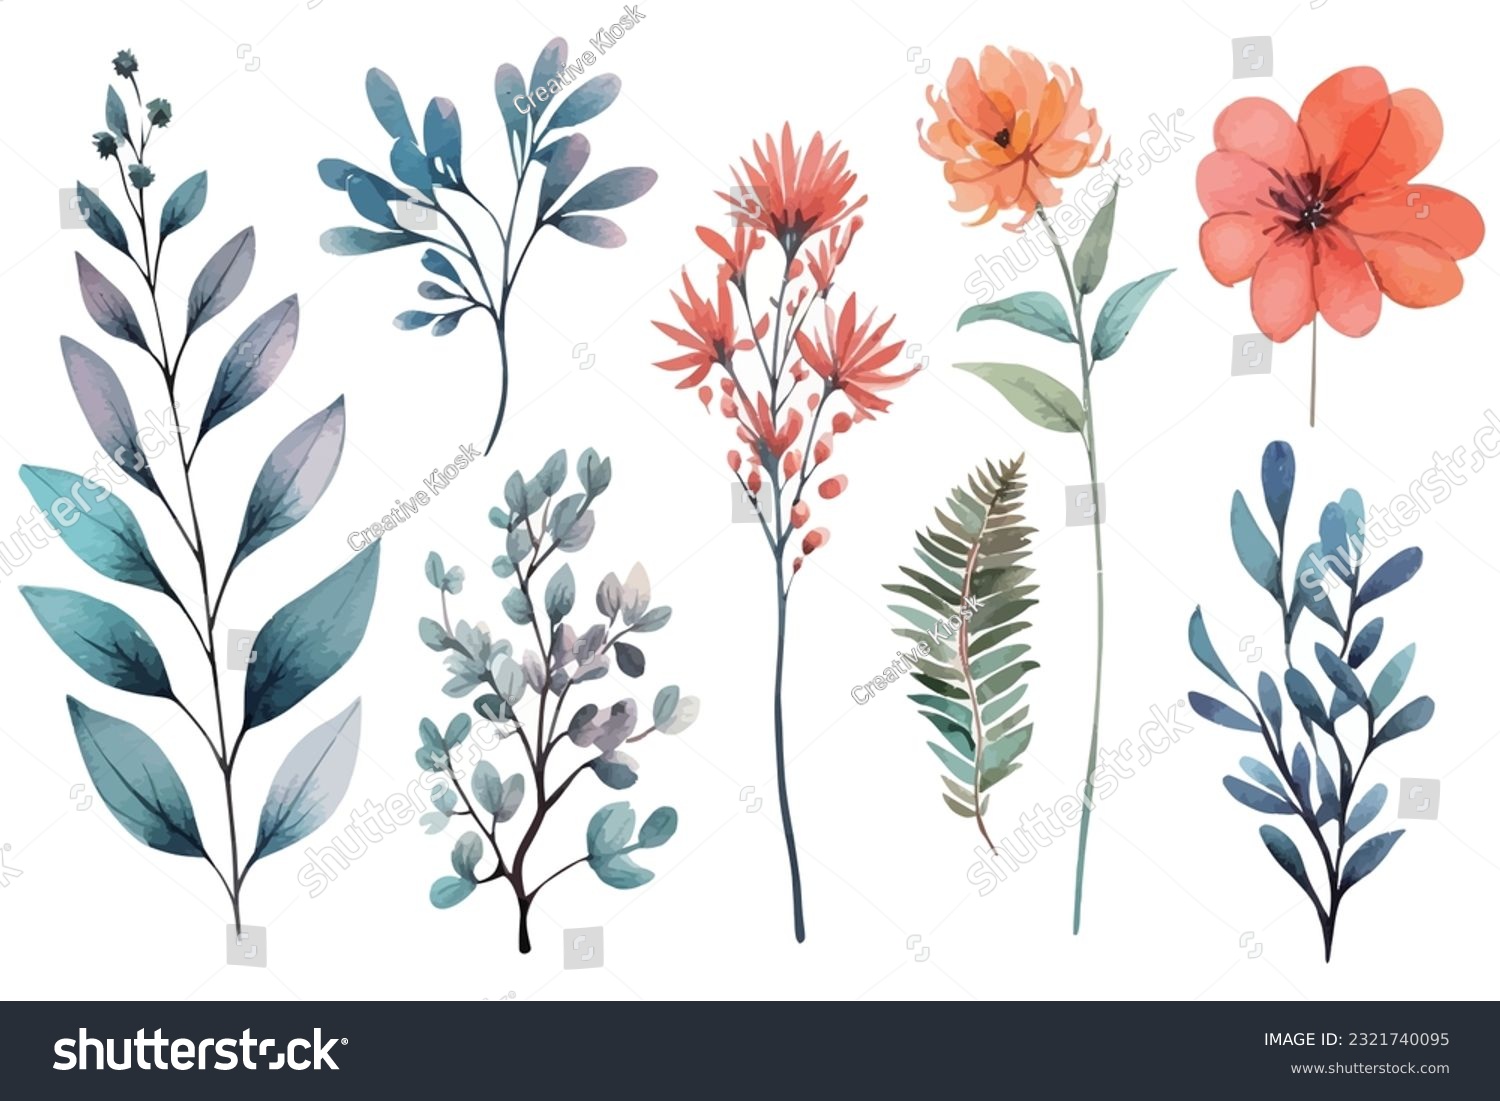 SVG of Abstract art vector illustration. Watercolor painting, children's wallpaper. Hand drawn vector illustration. flowers. modern Art. Prints, wallpapers, posters, cards, murals, rugs, hangings svg